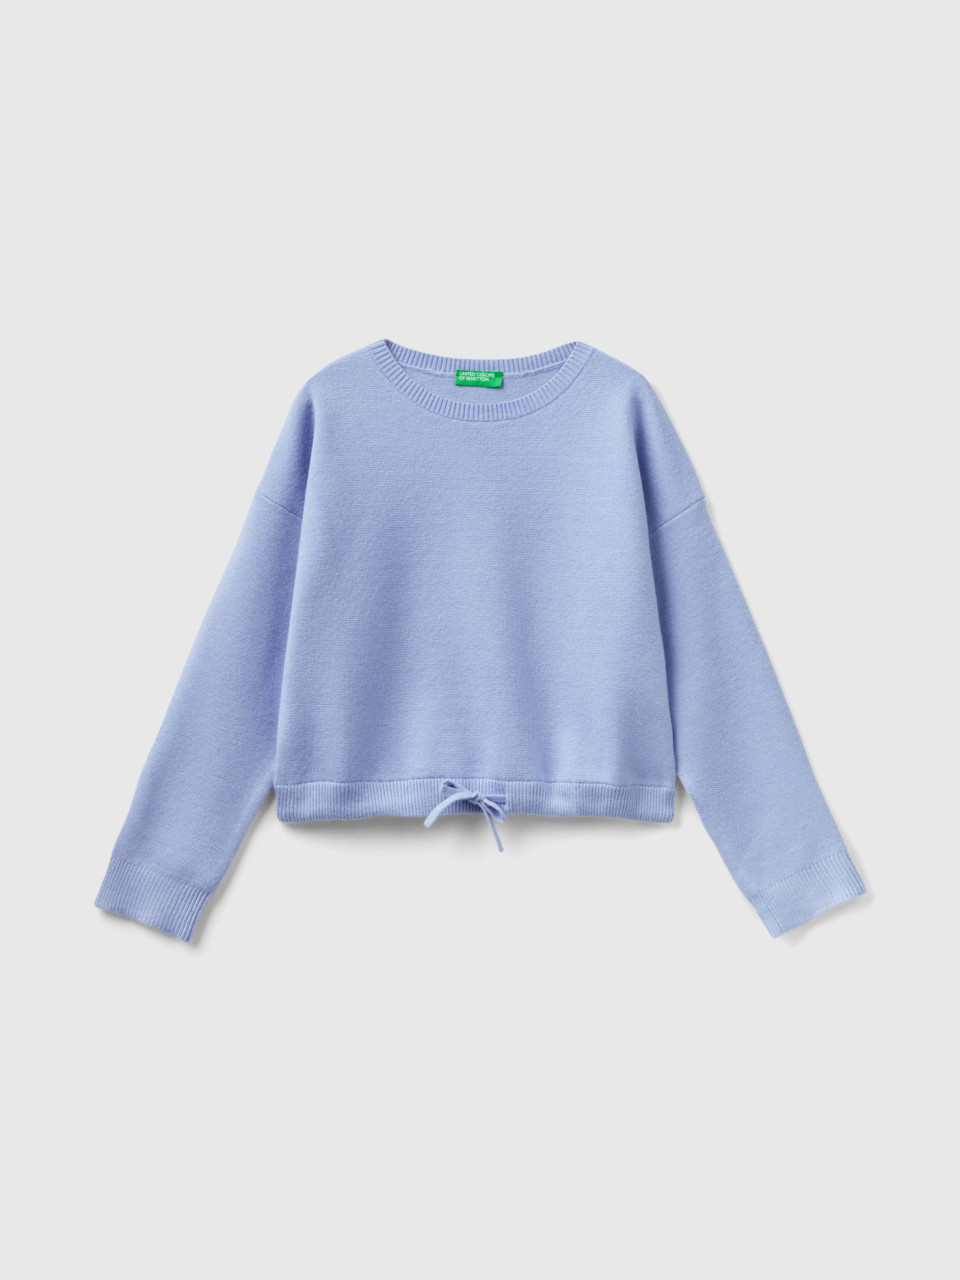 Benetton, Sweater With Drawstring, Lilac, Kids